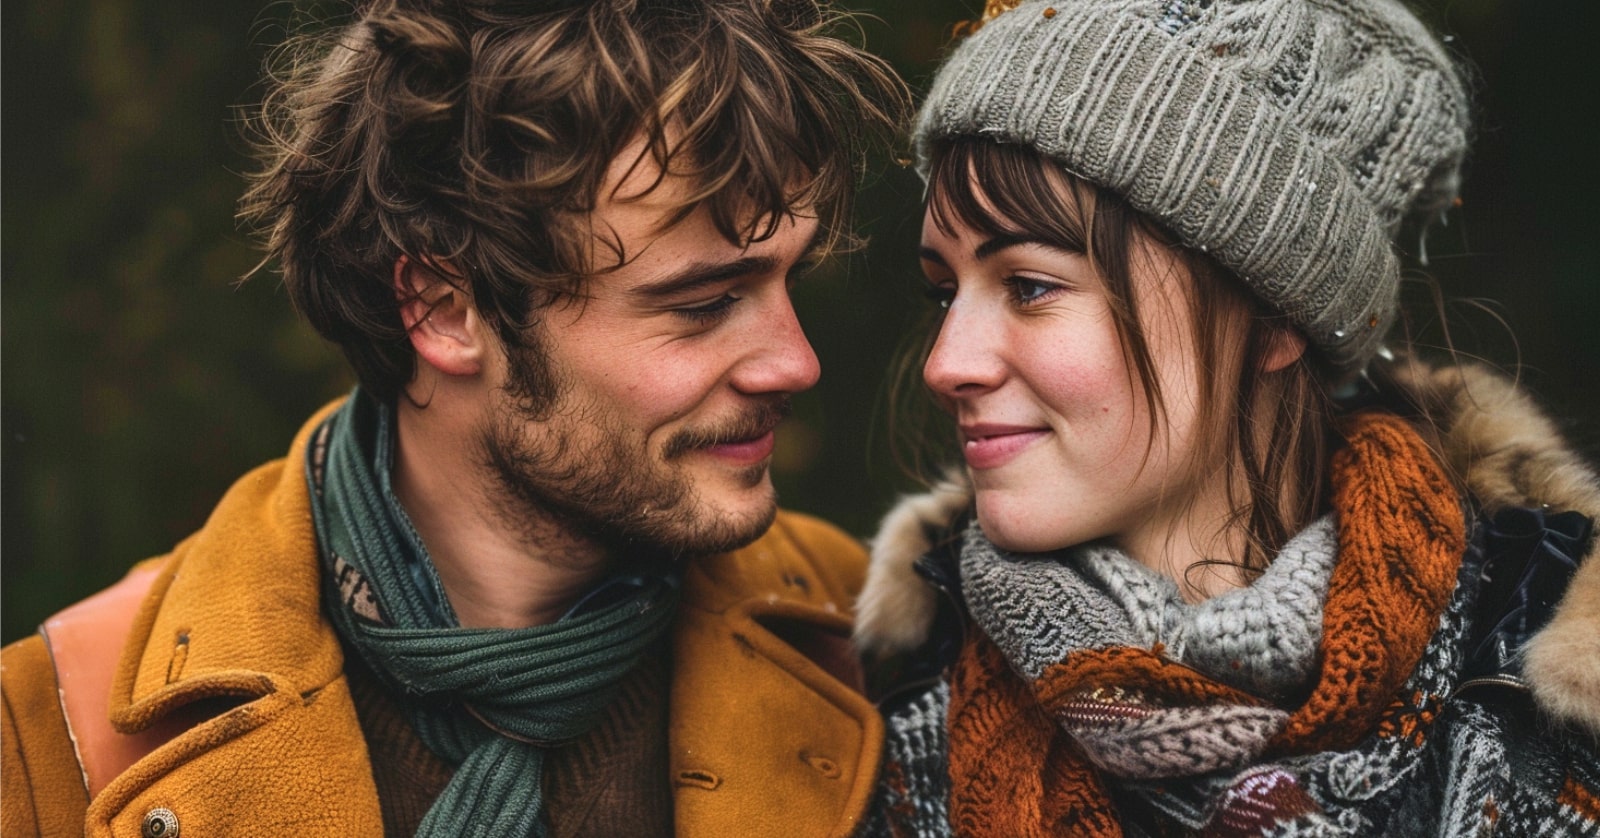 a couple wearing winter clothing gaze lovingly at each other